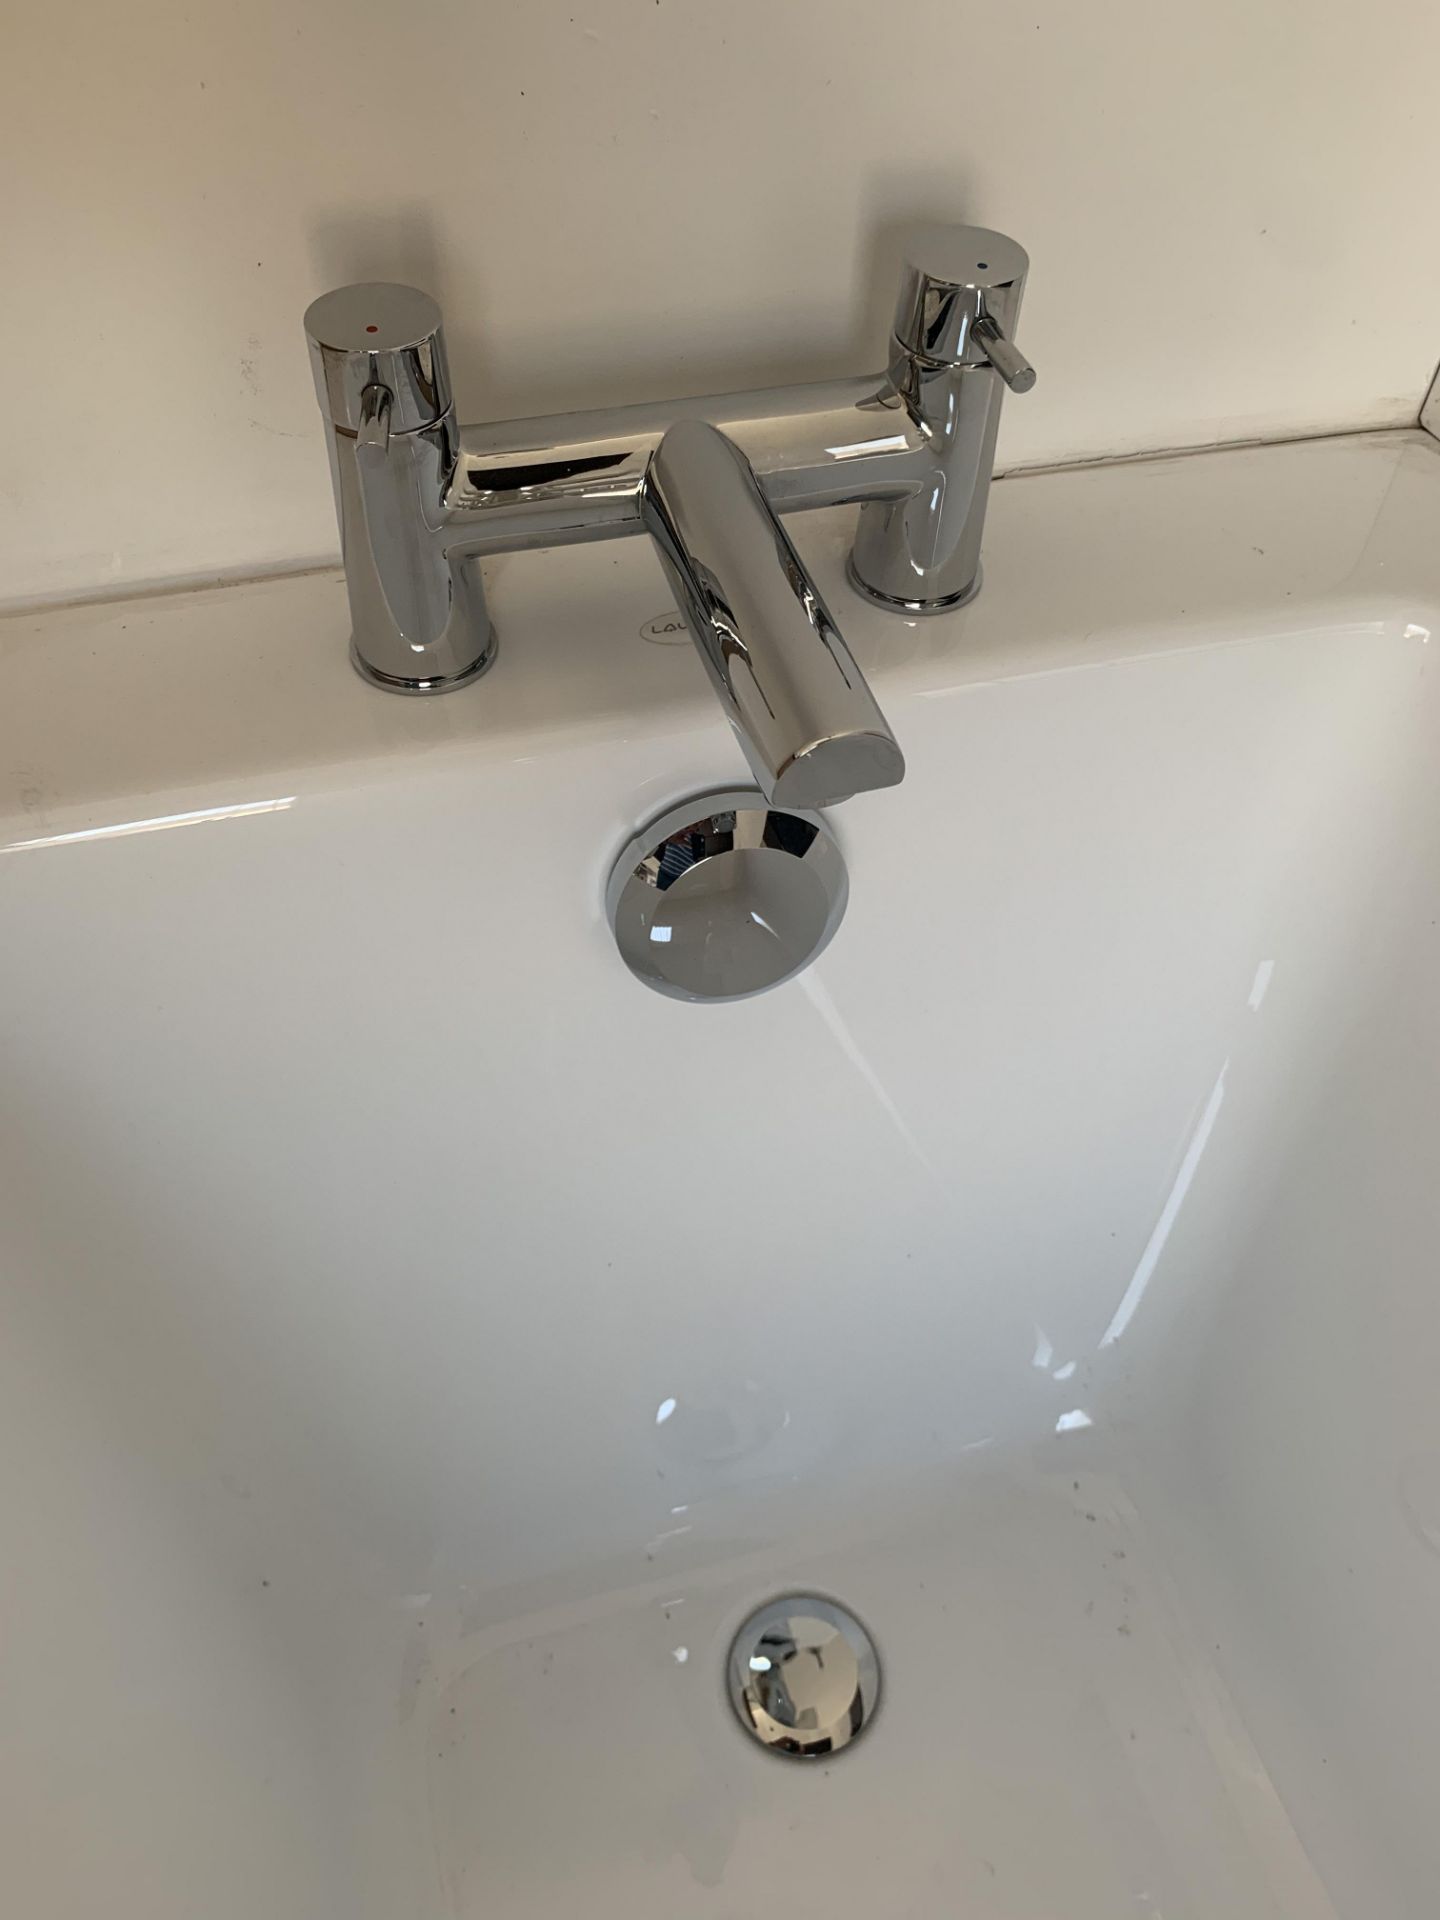 Laufen acrylic bath with feet frame and panel, chrome mixer tap 170l x 70w - Image 3 of 3